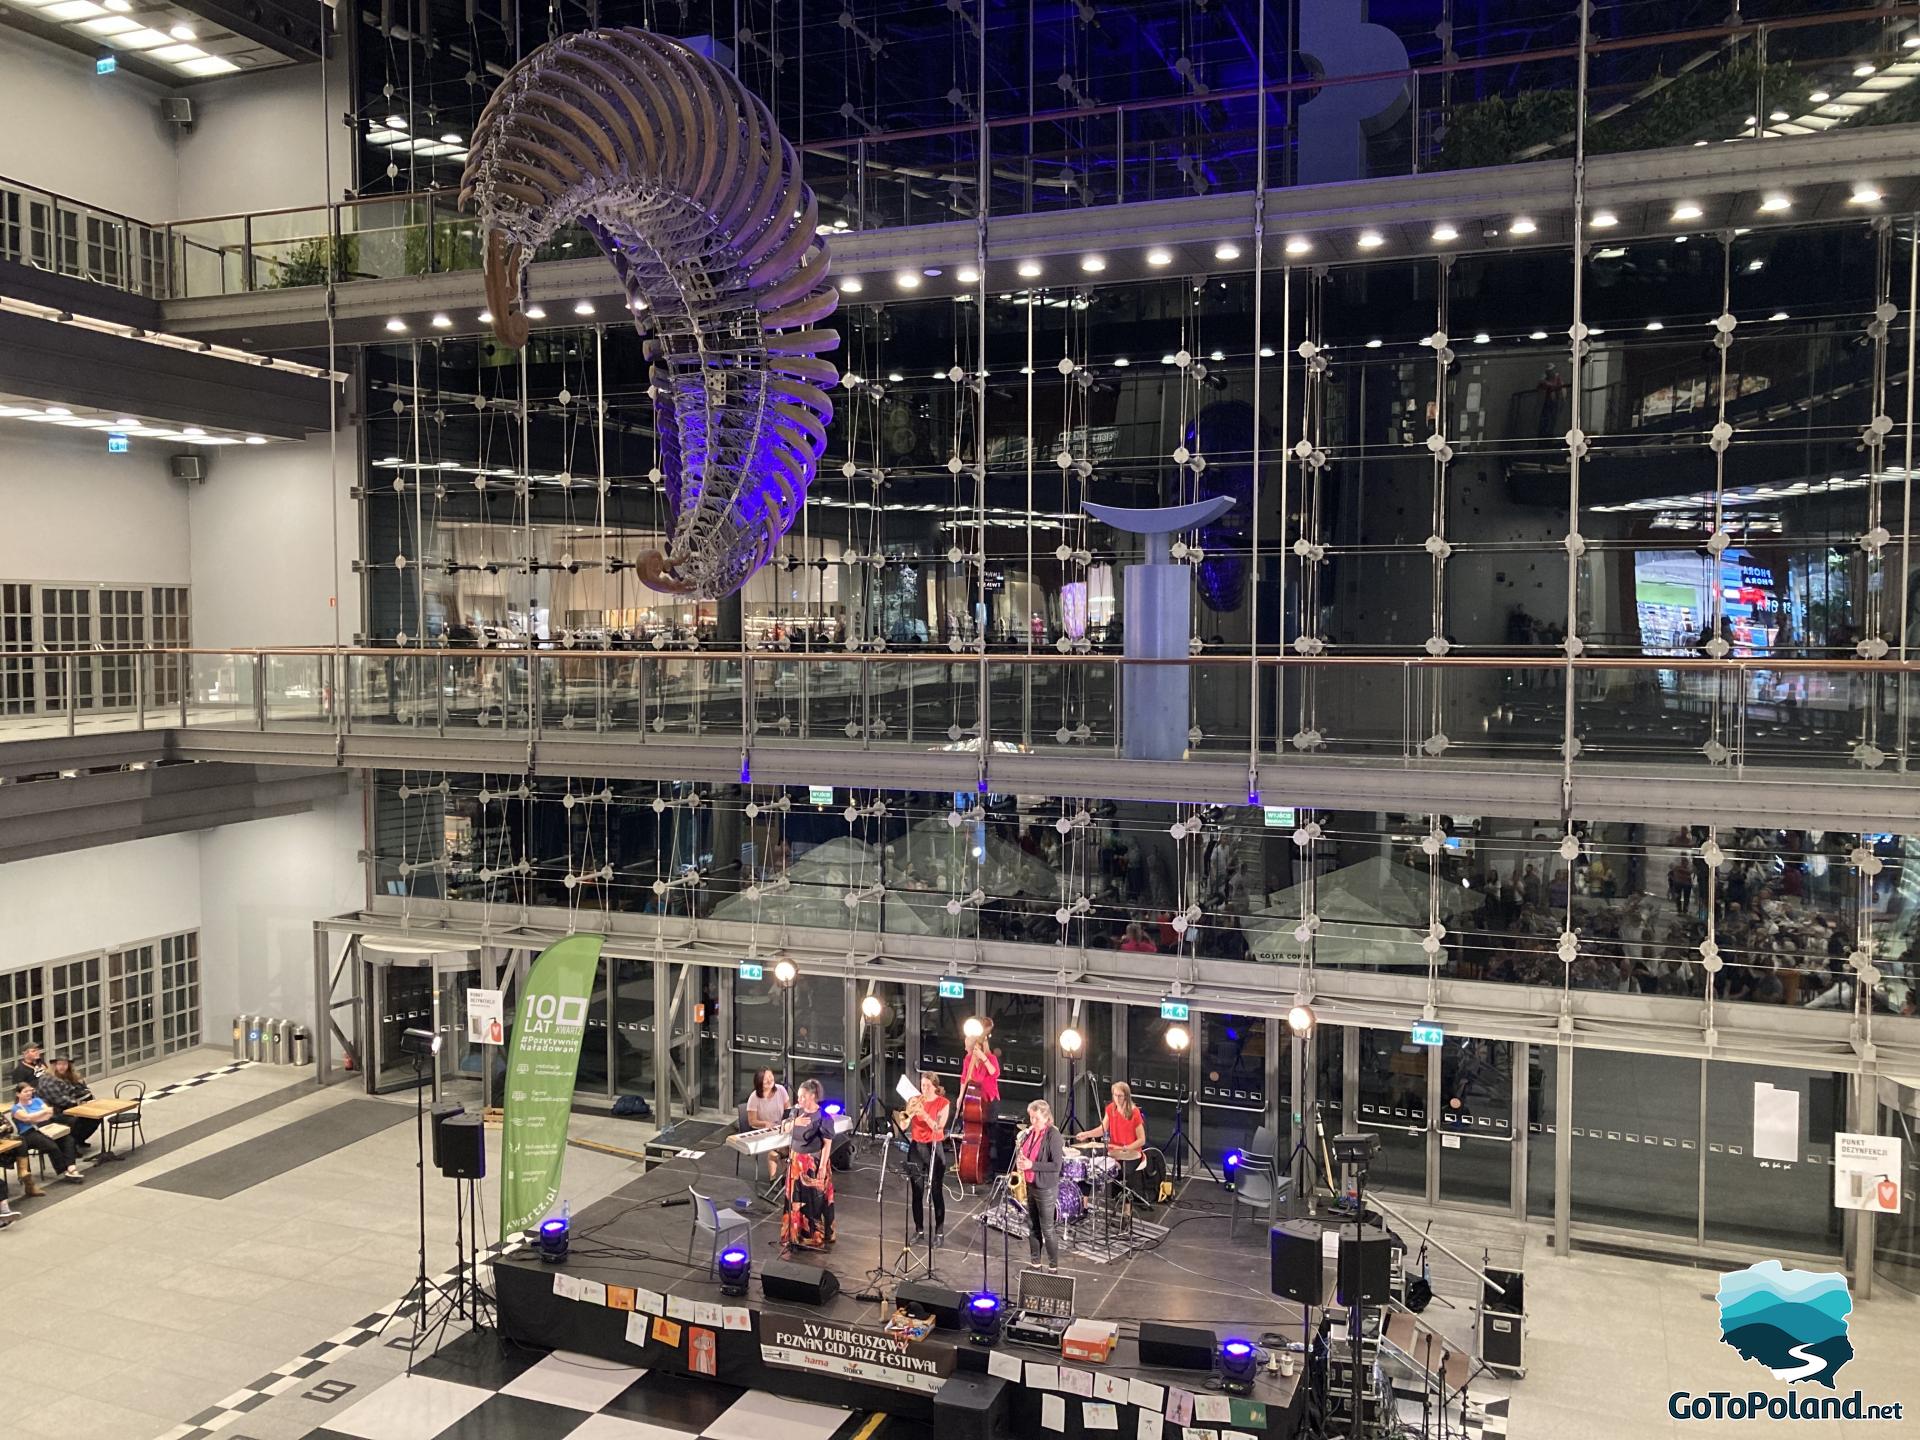 a small stage with singers and musicians located in a shopping mall